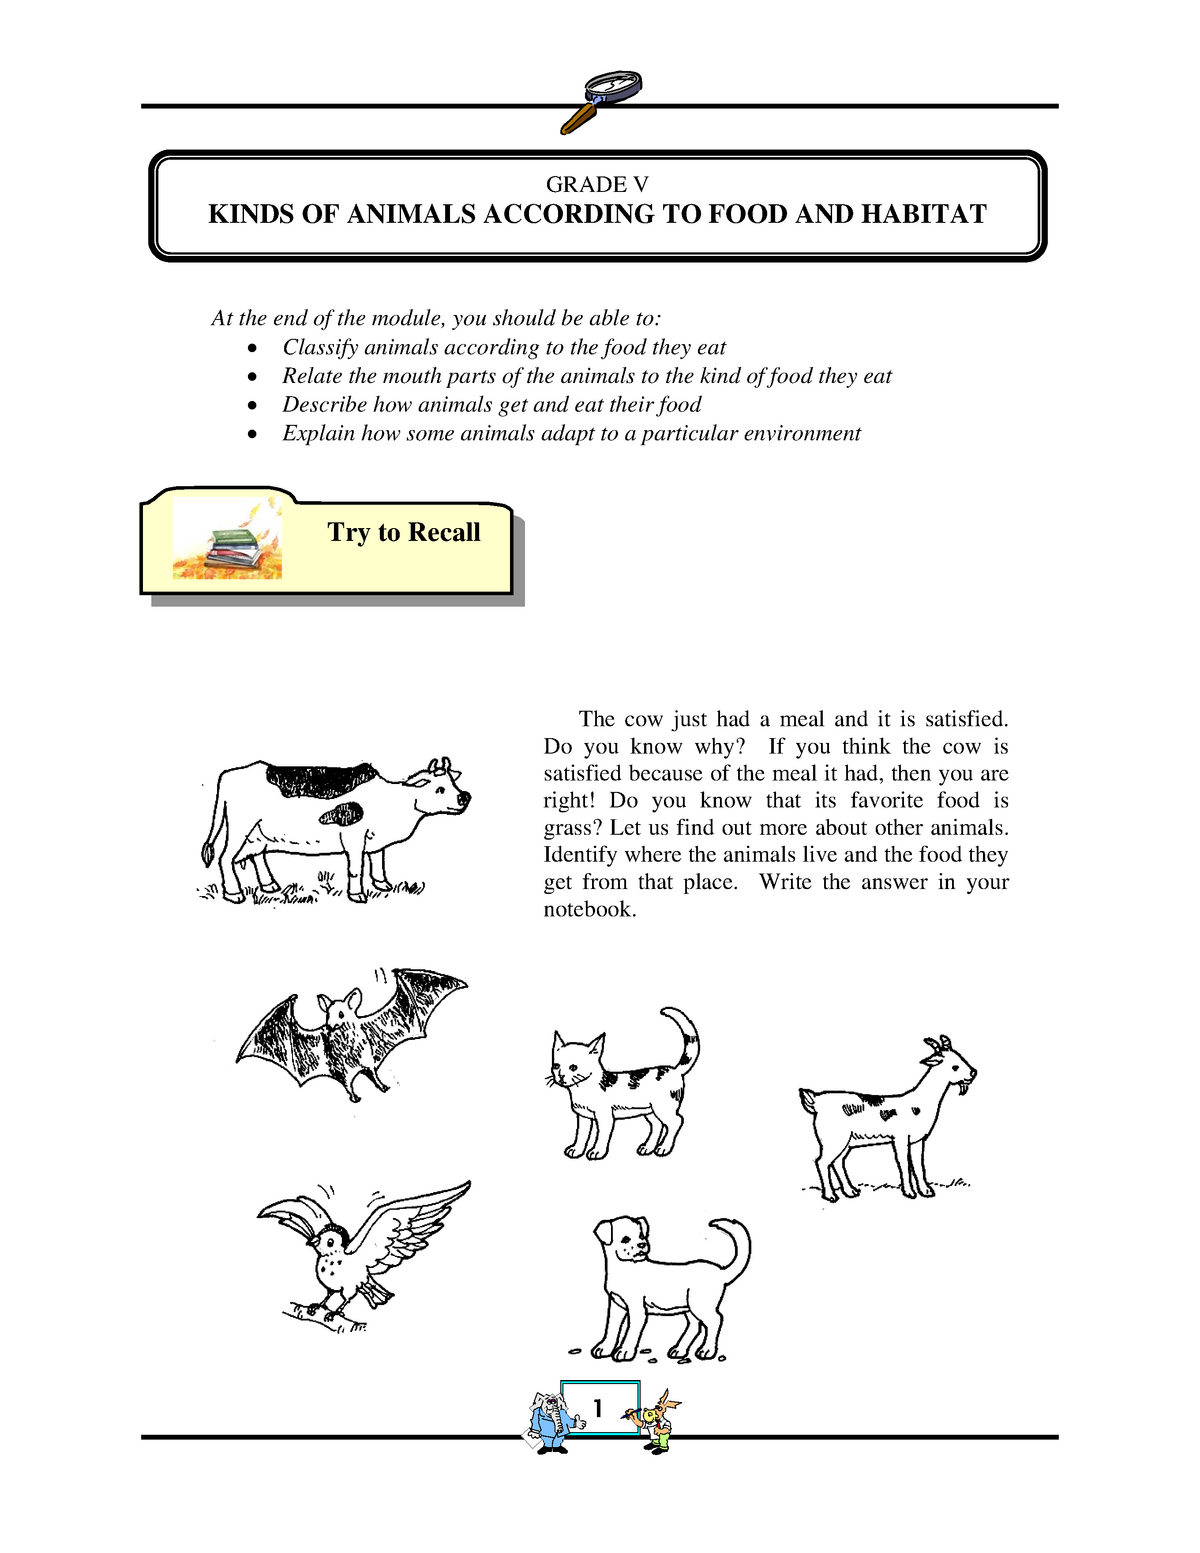 7. Kinds OF Animal According TO FOOD AND Habitat - At the end of the  module, you should be able to: - Studocu